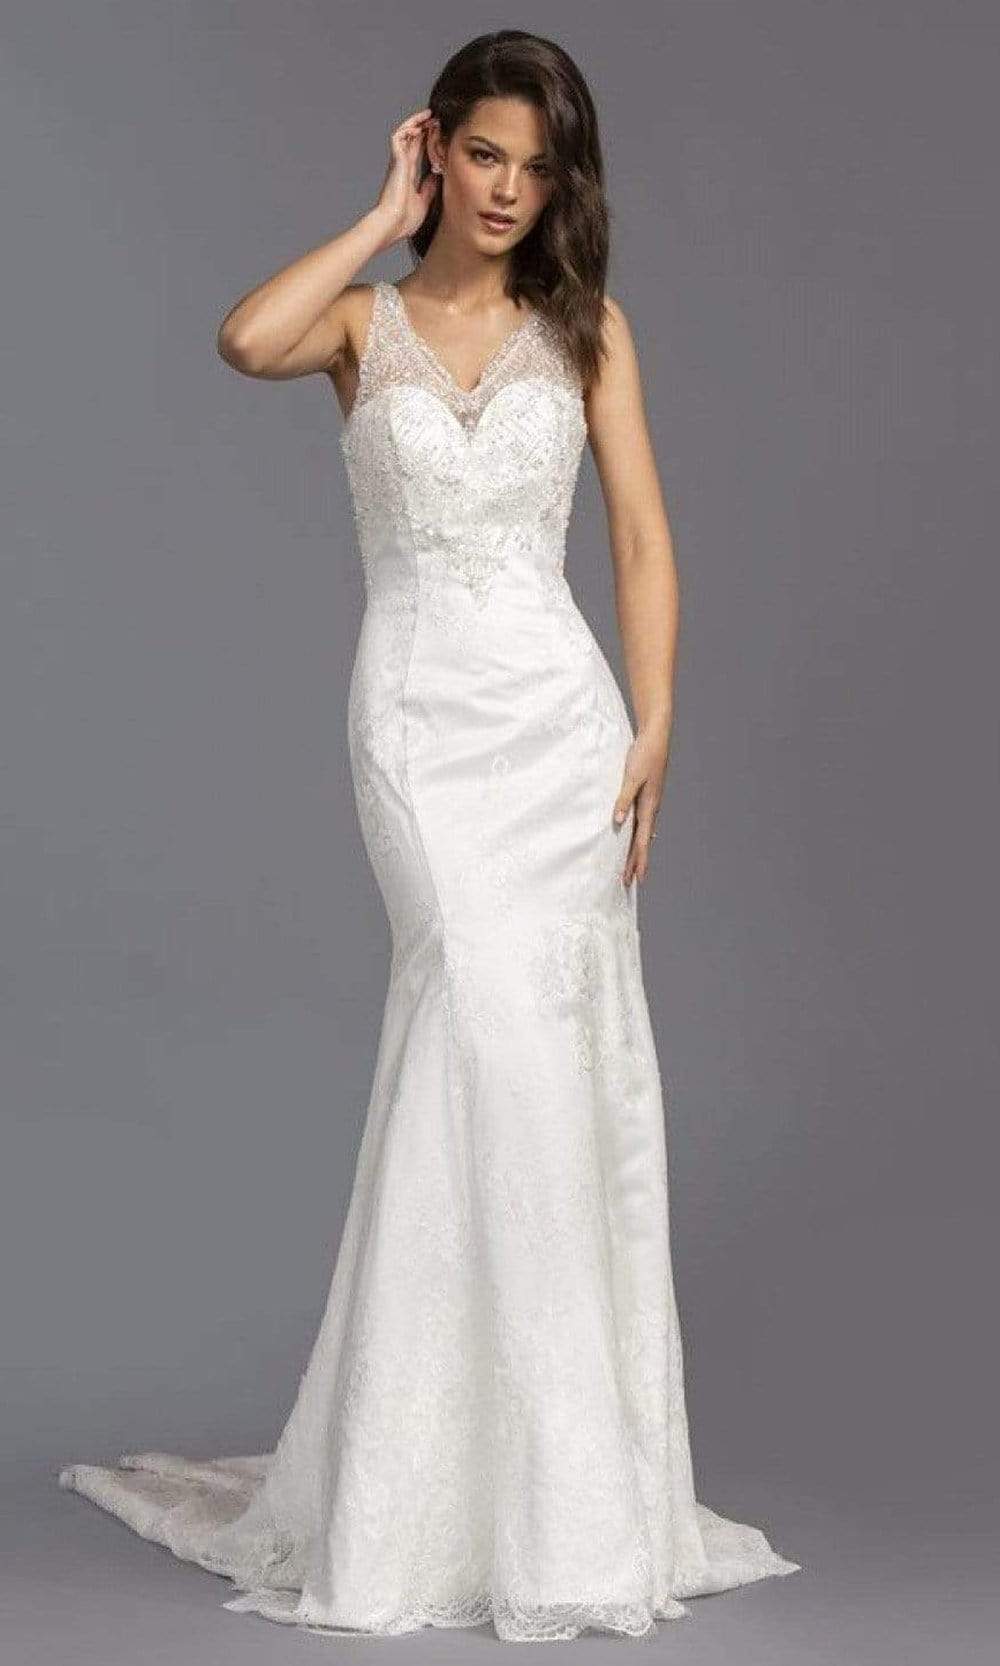 Image of Aspeed Bridal - L2145 V Neck Beaded Accented Lace Bridal